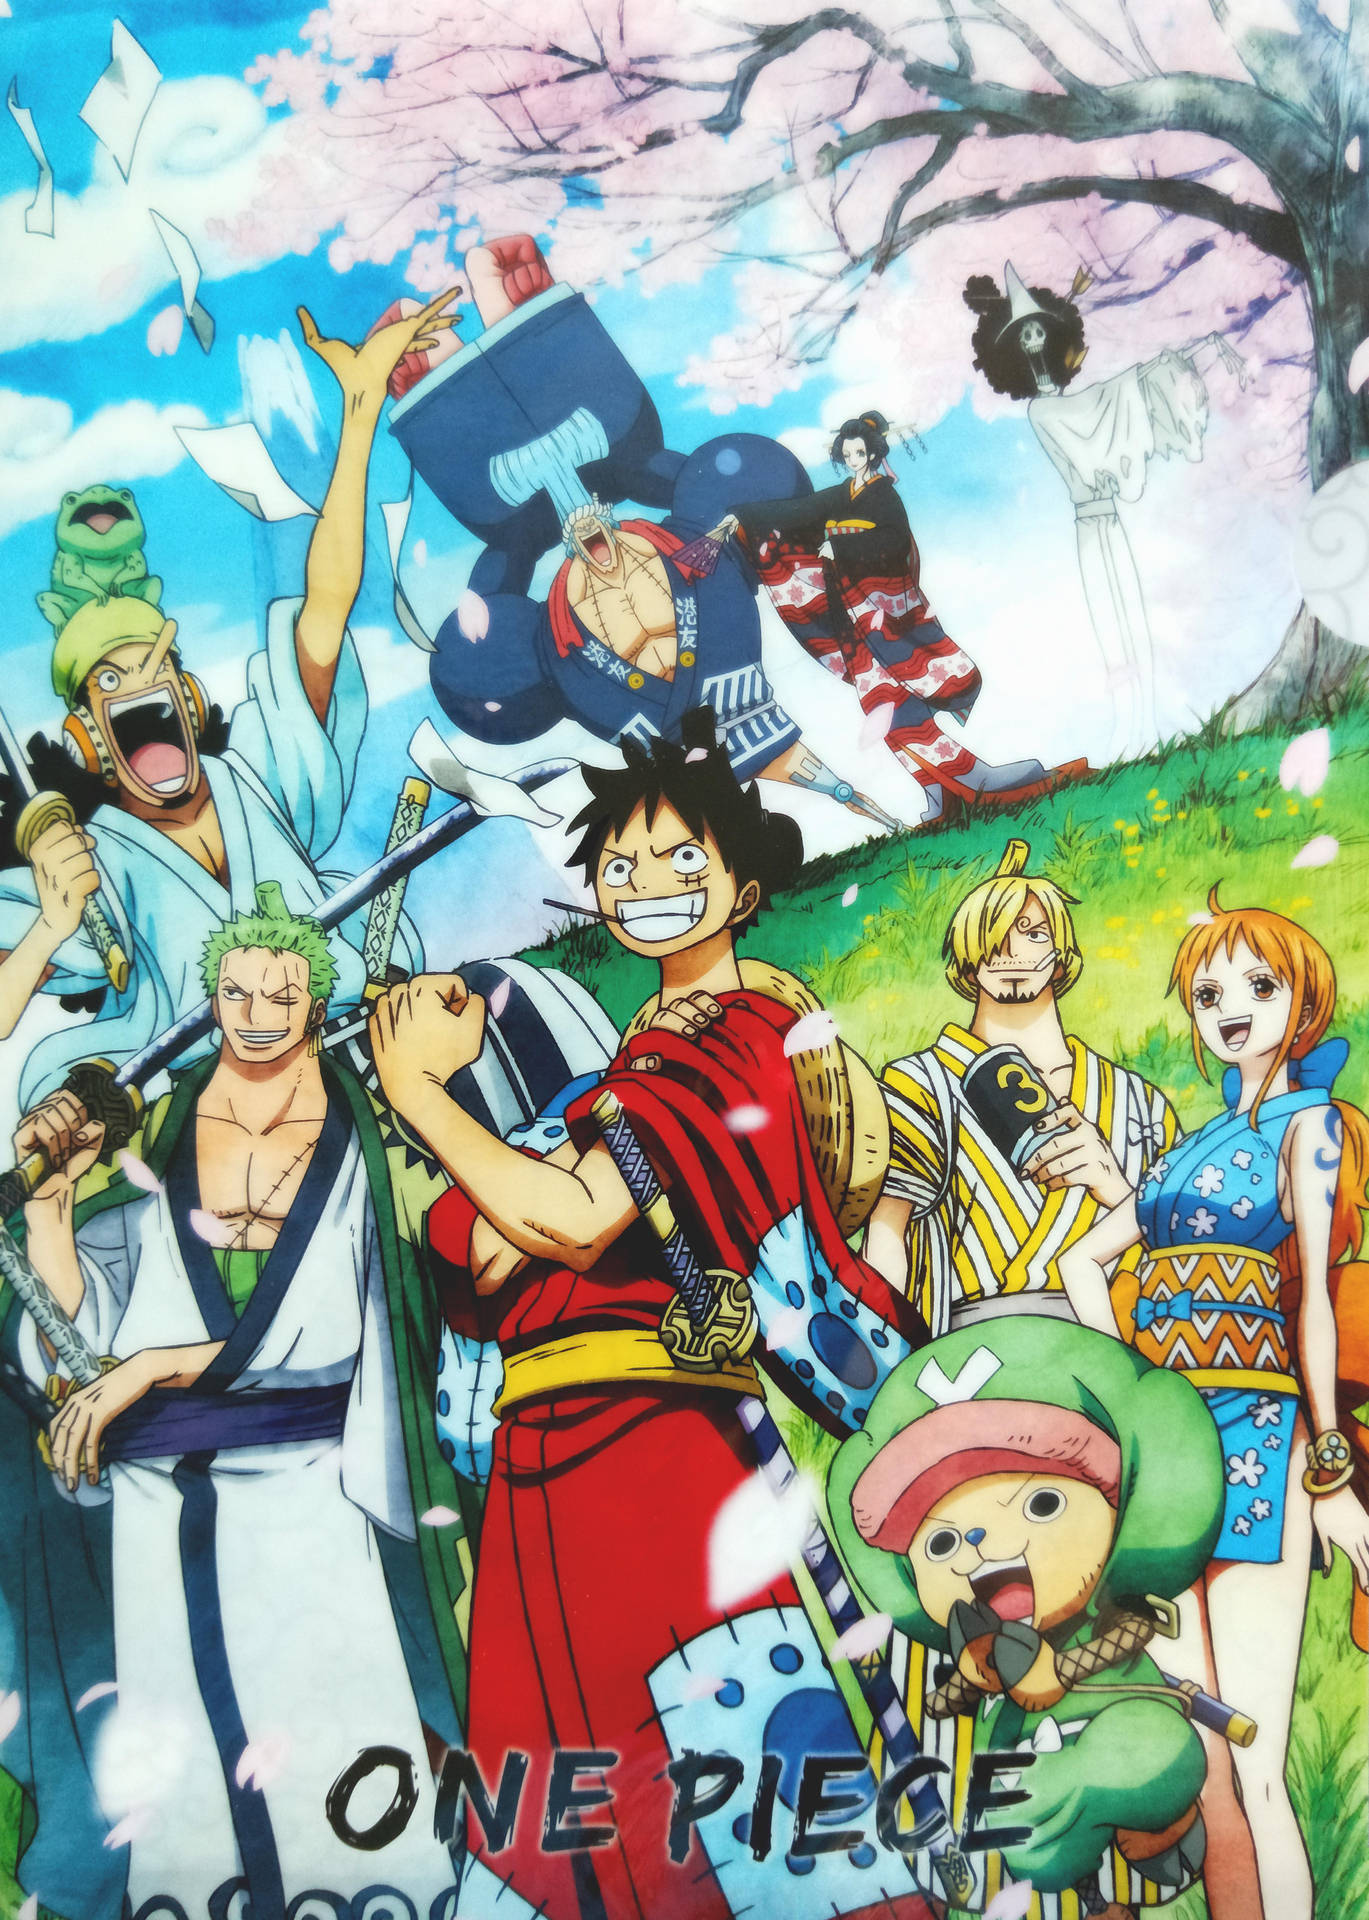 Top 999+ One Piece Wano Wallpaper Full HD, 4K Free to Use